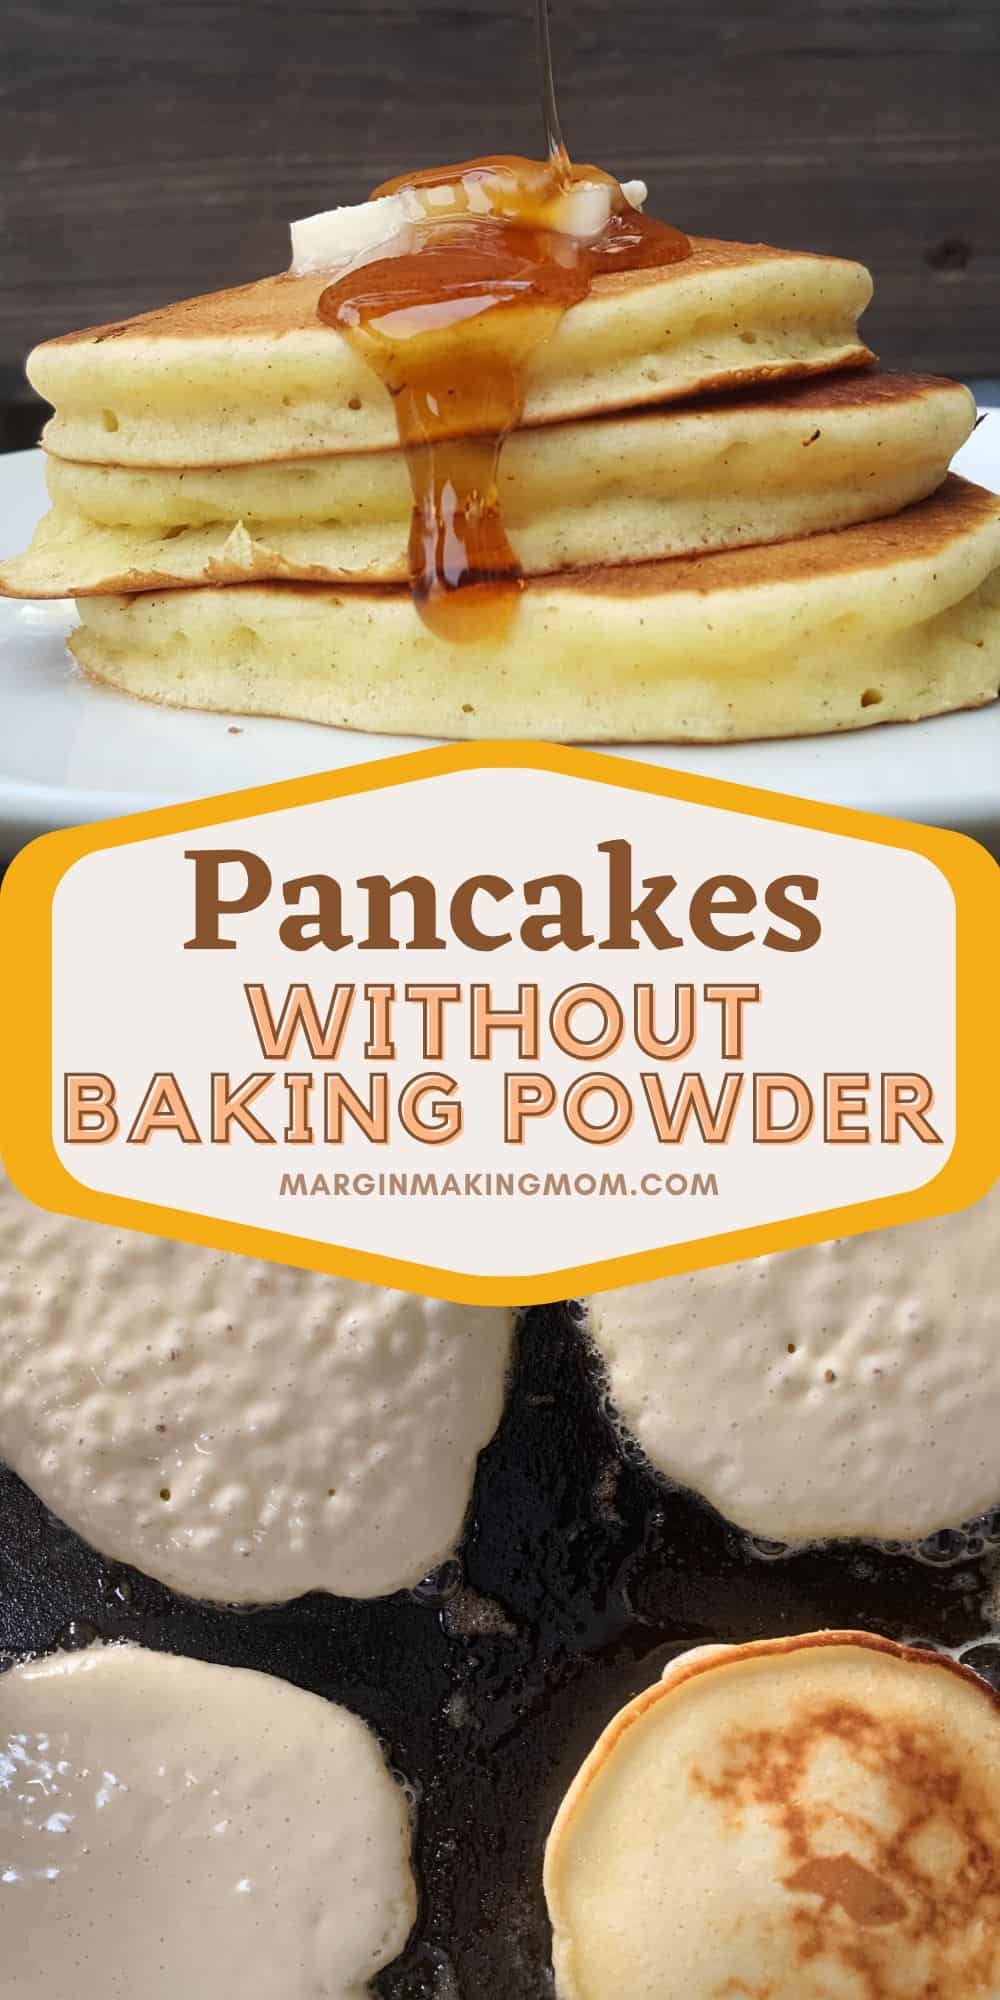 two photos; one shows a stack of pancakes made with self-rising flour, the other shows pancake batter cooking on a griddle